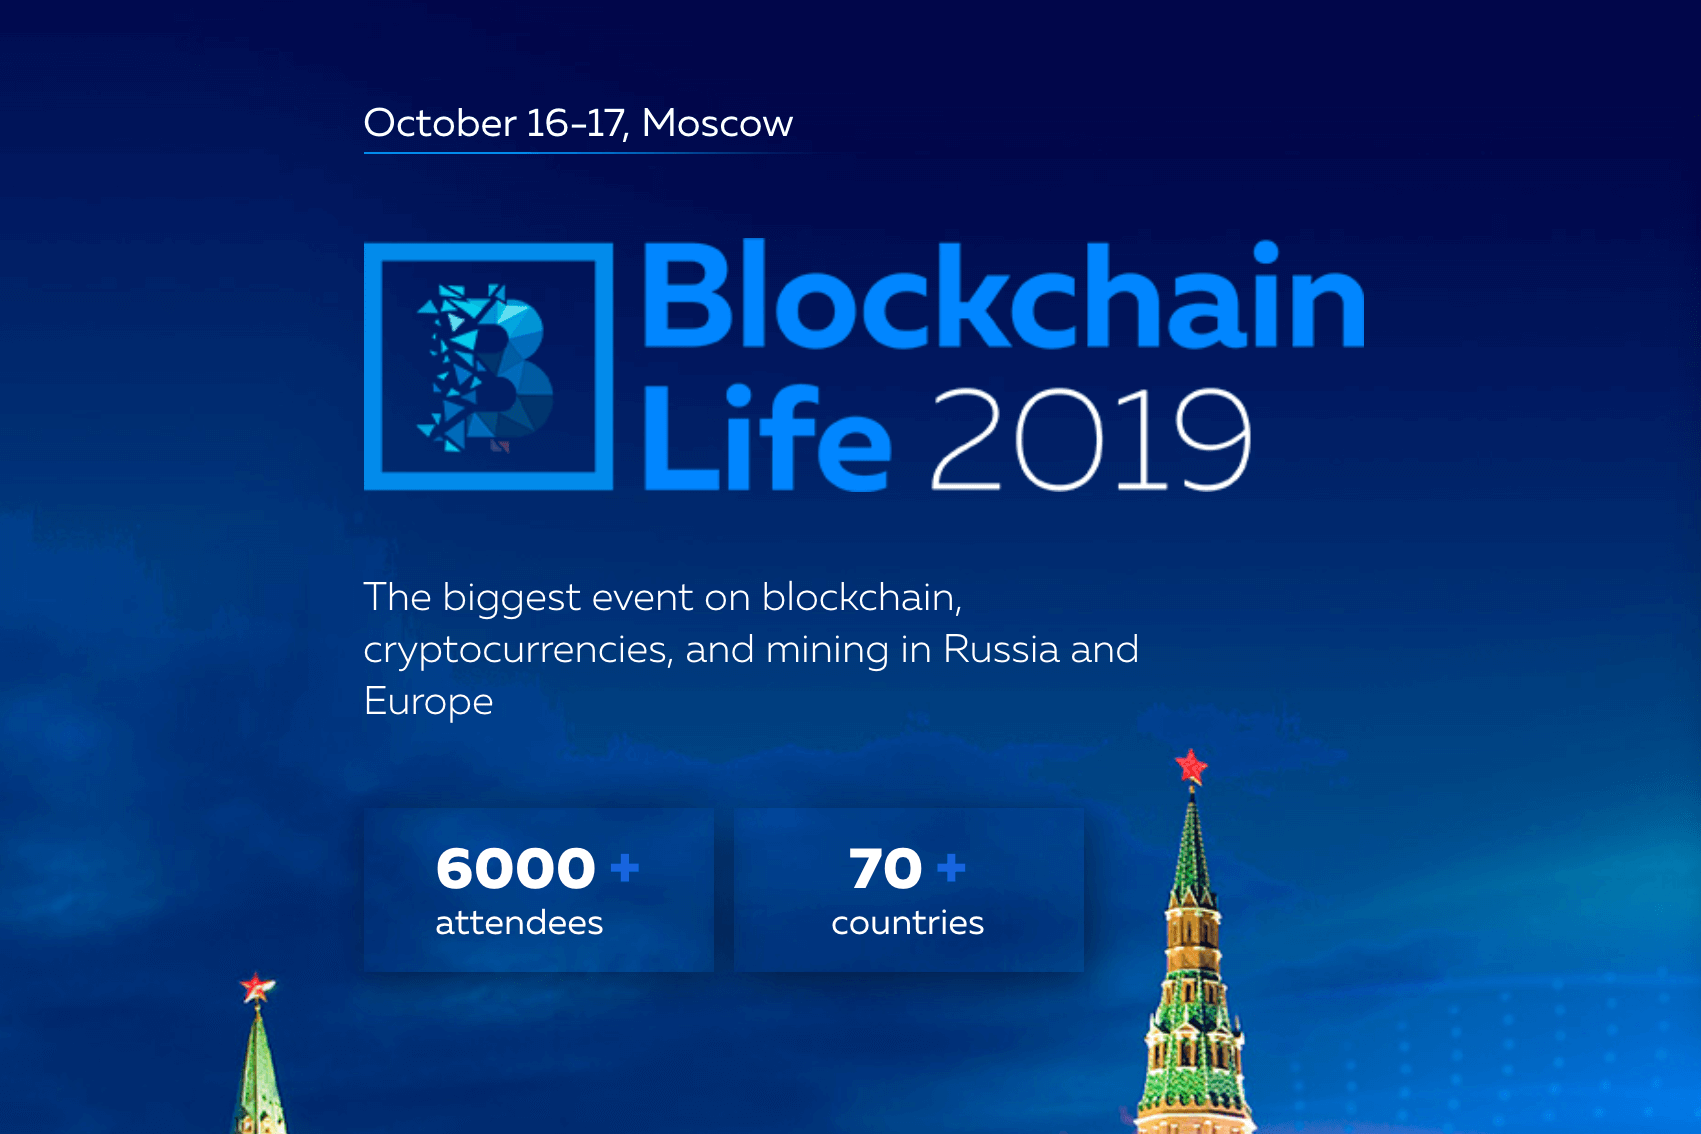 On October 16-17, the Blockchain Life 2019 forum will be held in Moscow